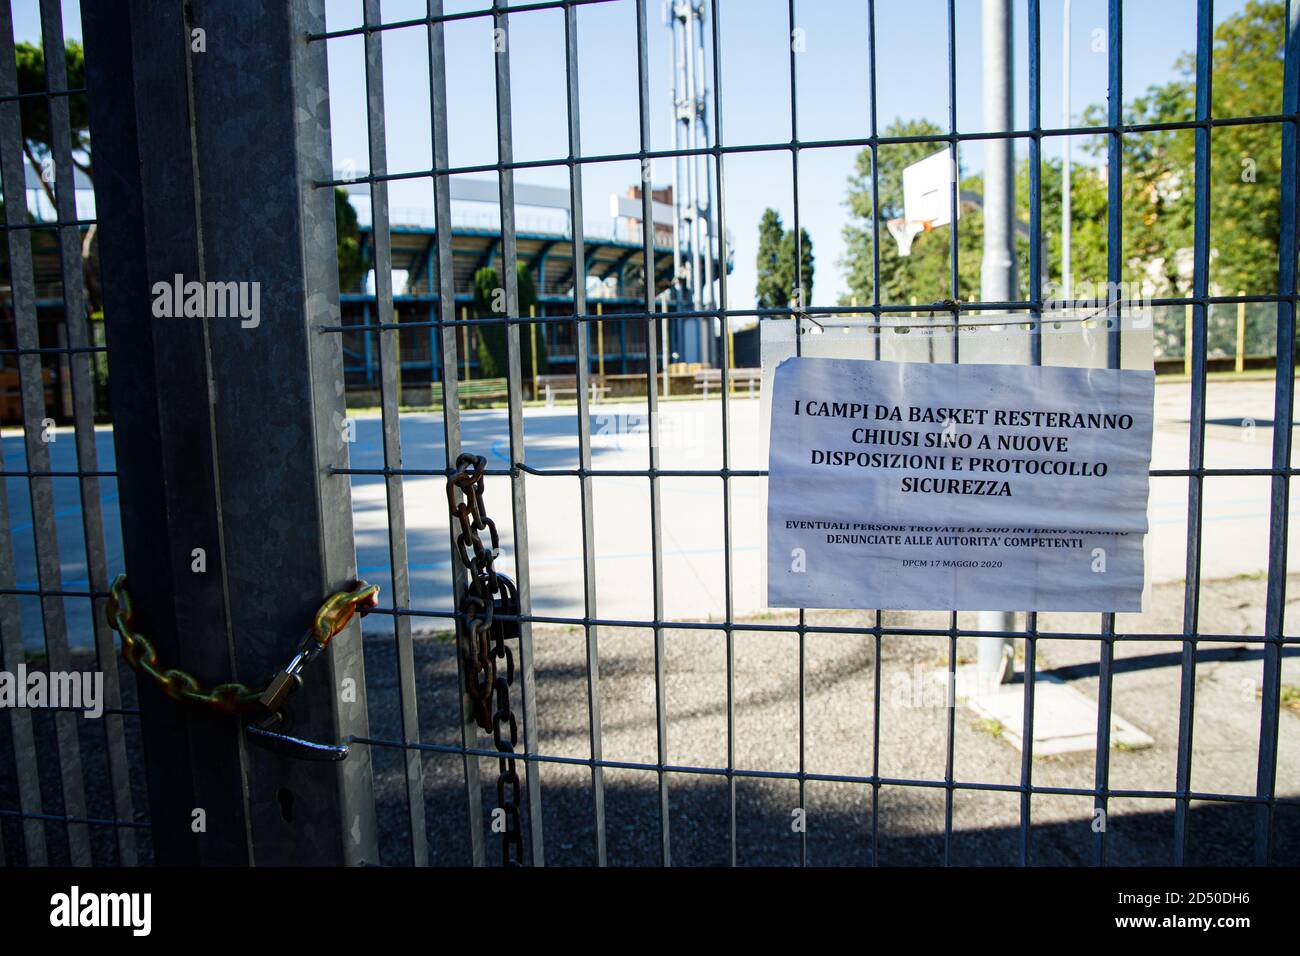 Notice outside a playground that warns of the closure of the playing area due to the covid restrictions in Bologna (Italy) on 18 July 2020 Stock Photo